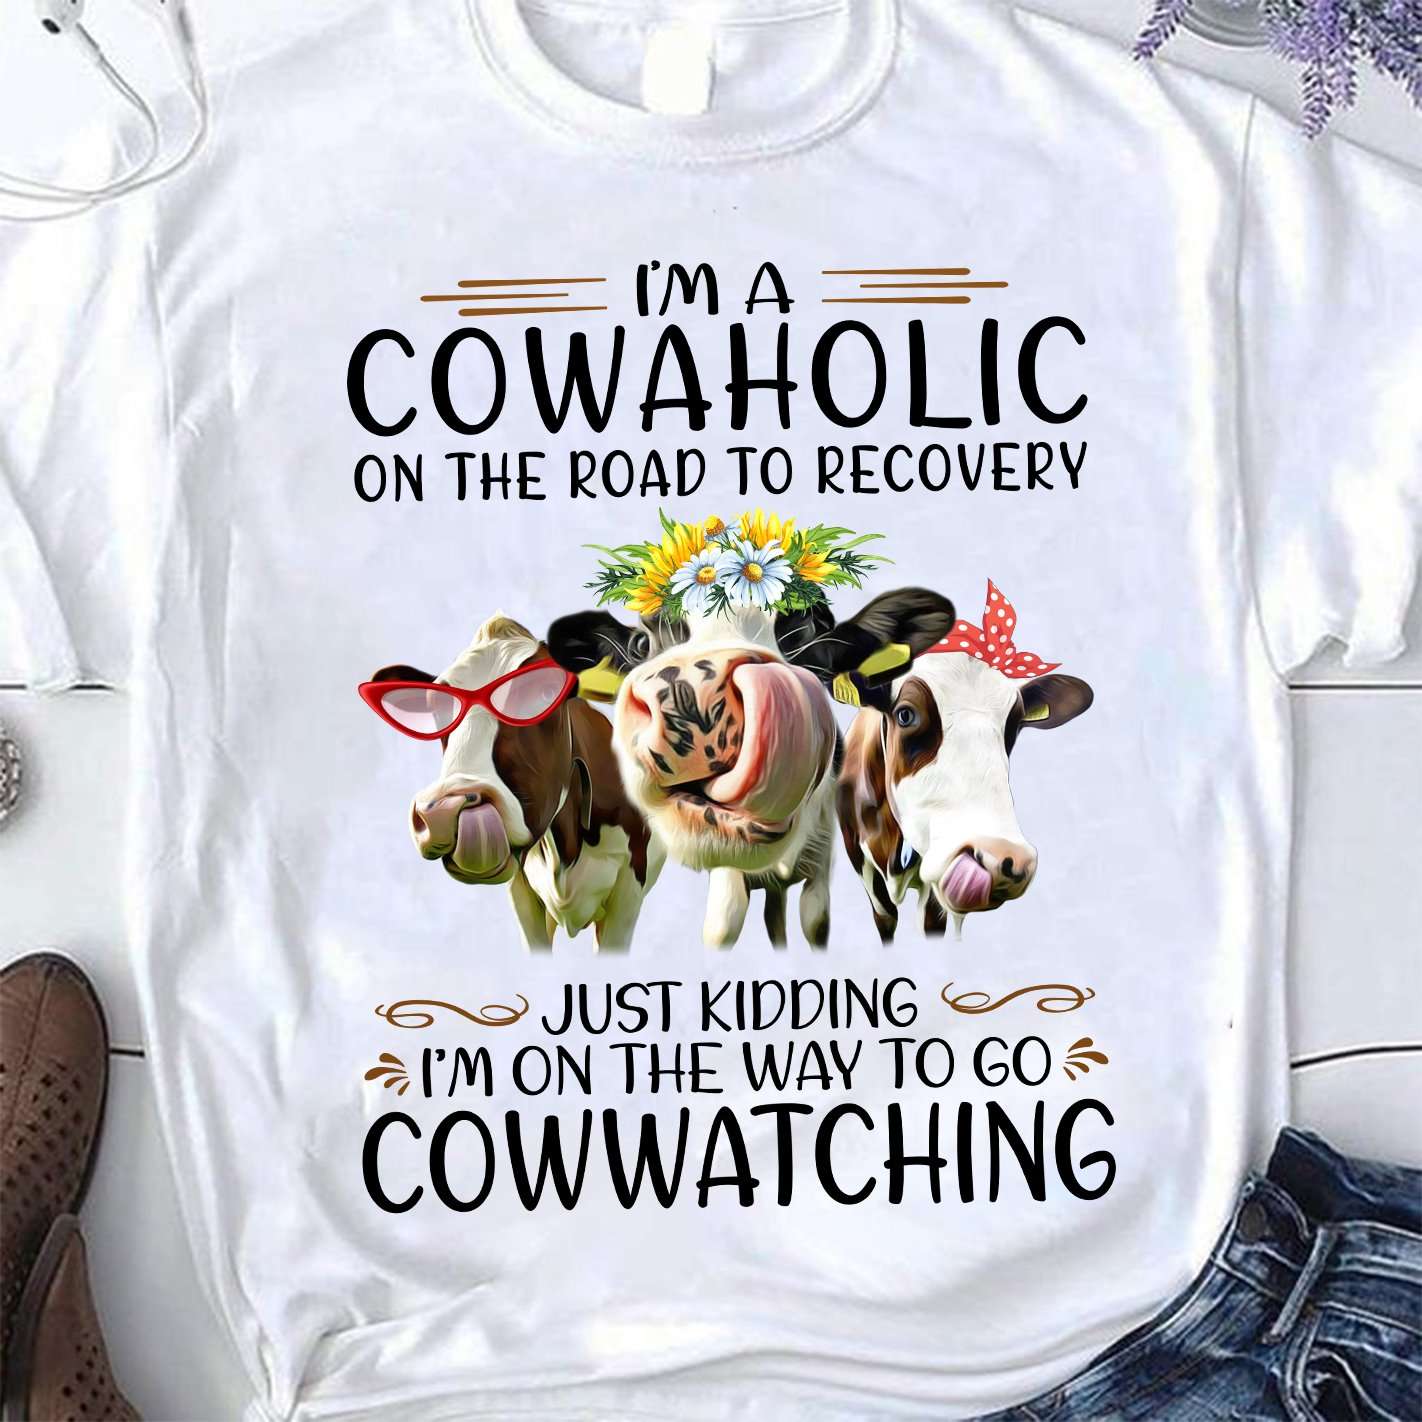 I'm a cowaholic on the road the recovery just kidding i'm on the way to go cowwatching - Funny Cow